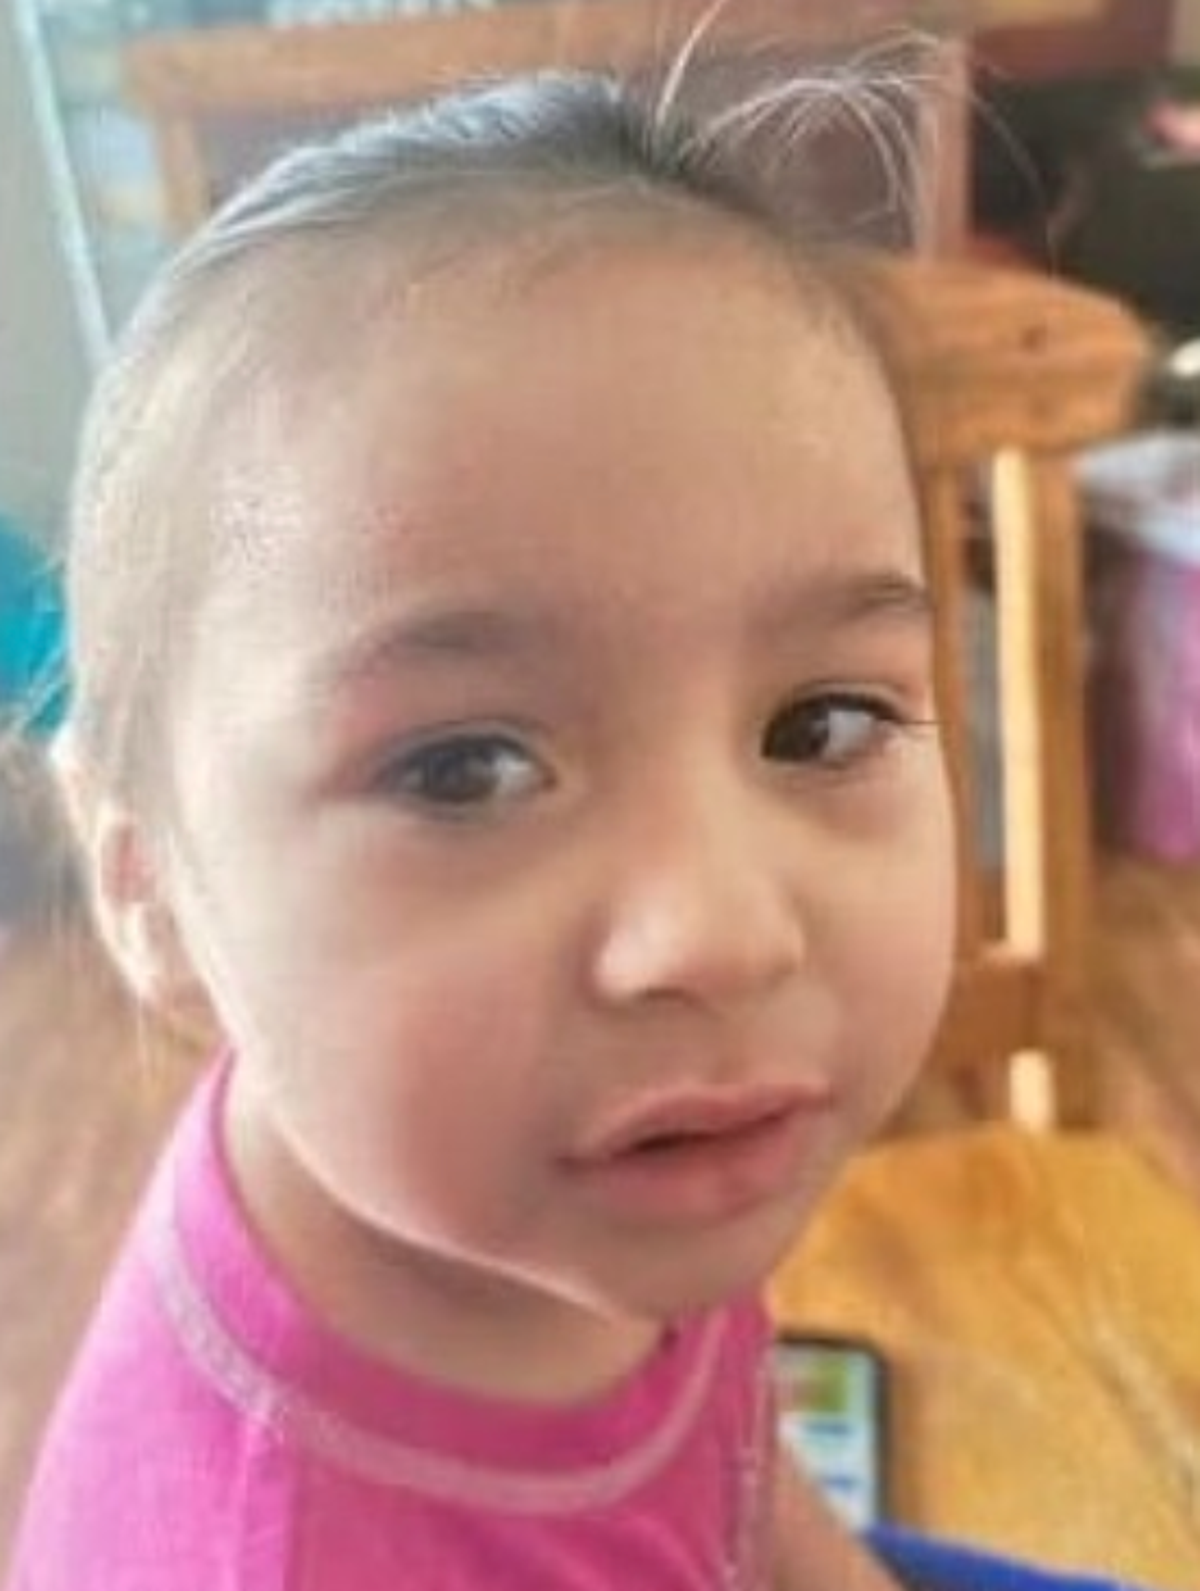 Amber alert issued for abducted three-year-old girl in North Dakota